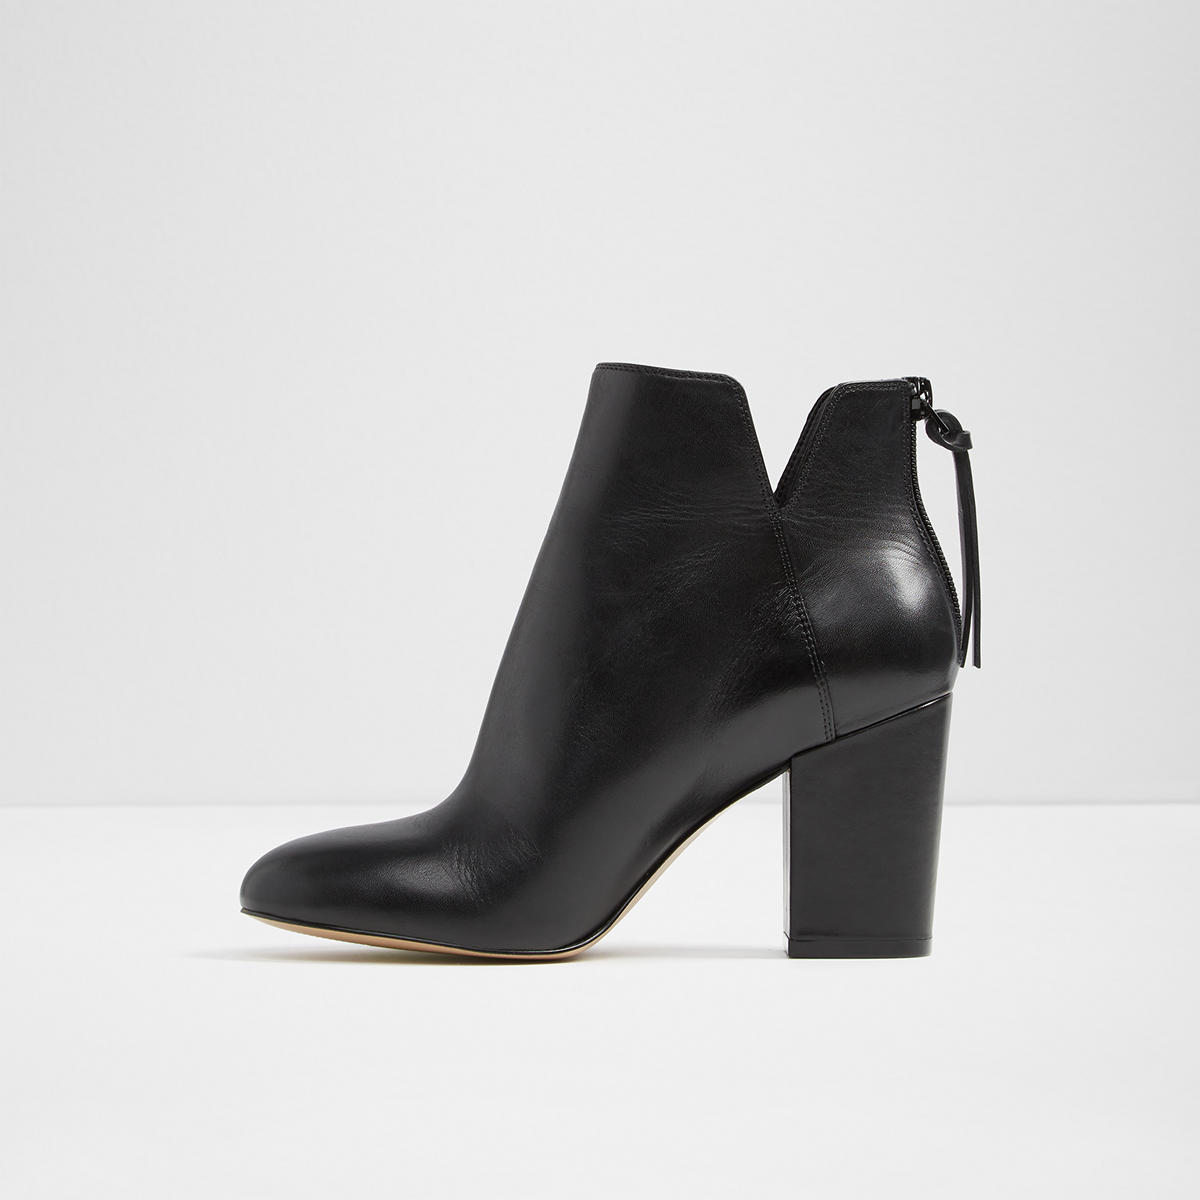 Dominicaa Black Leather Smooth Women's Ankle boots | ALDO US